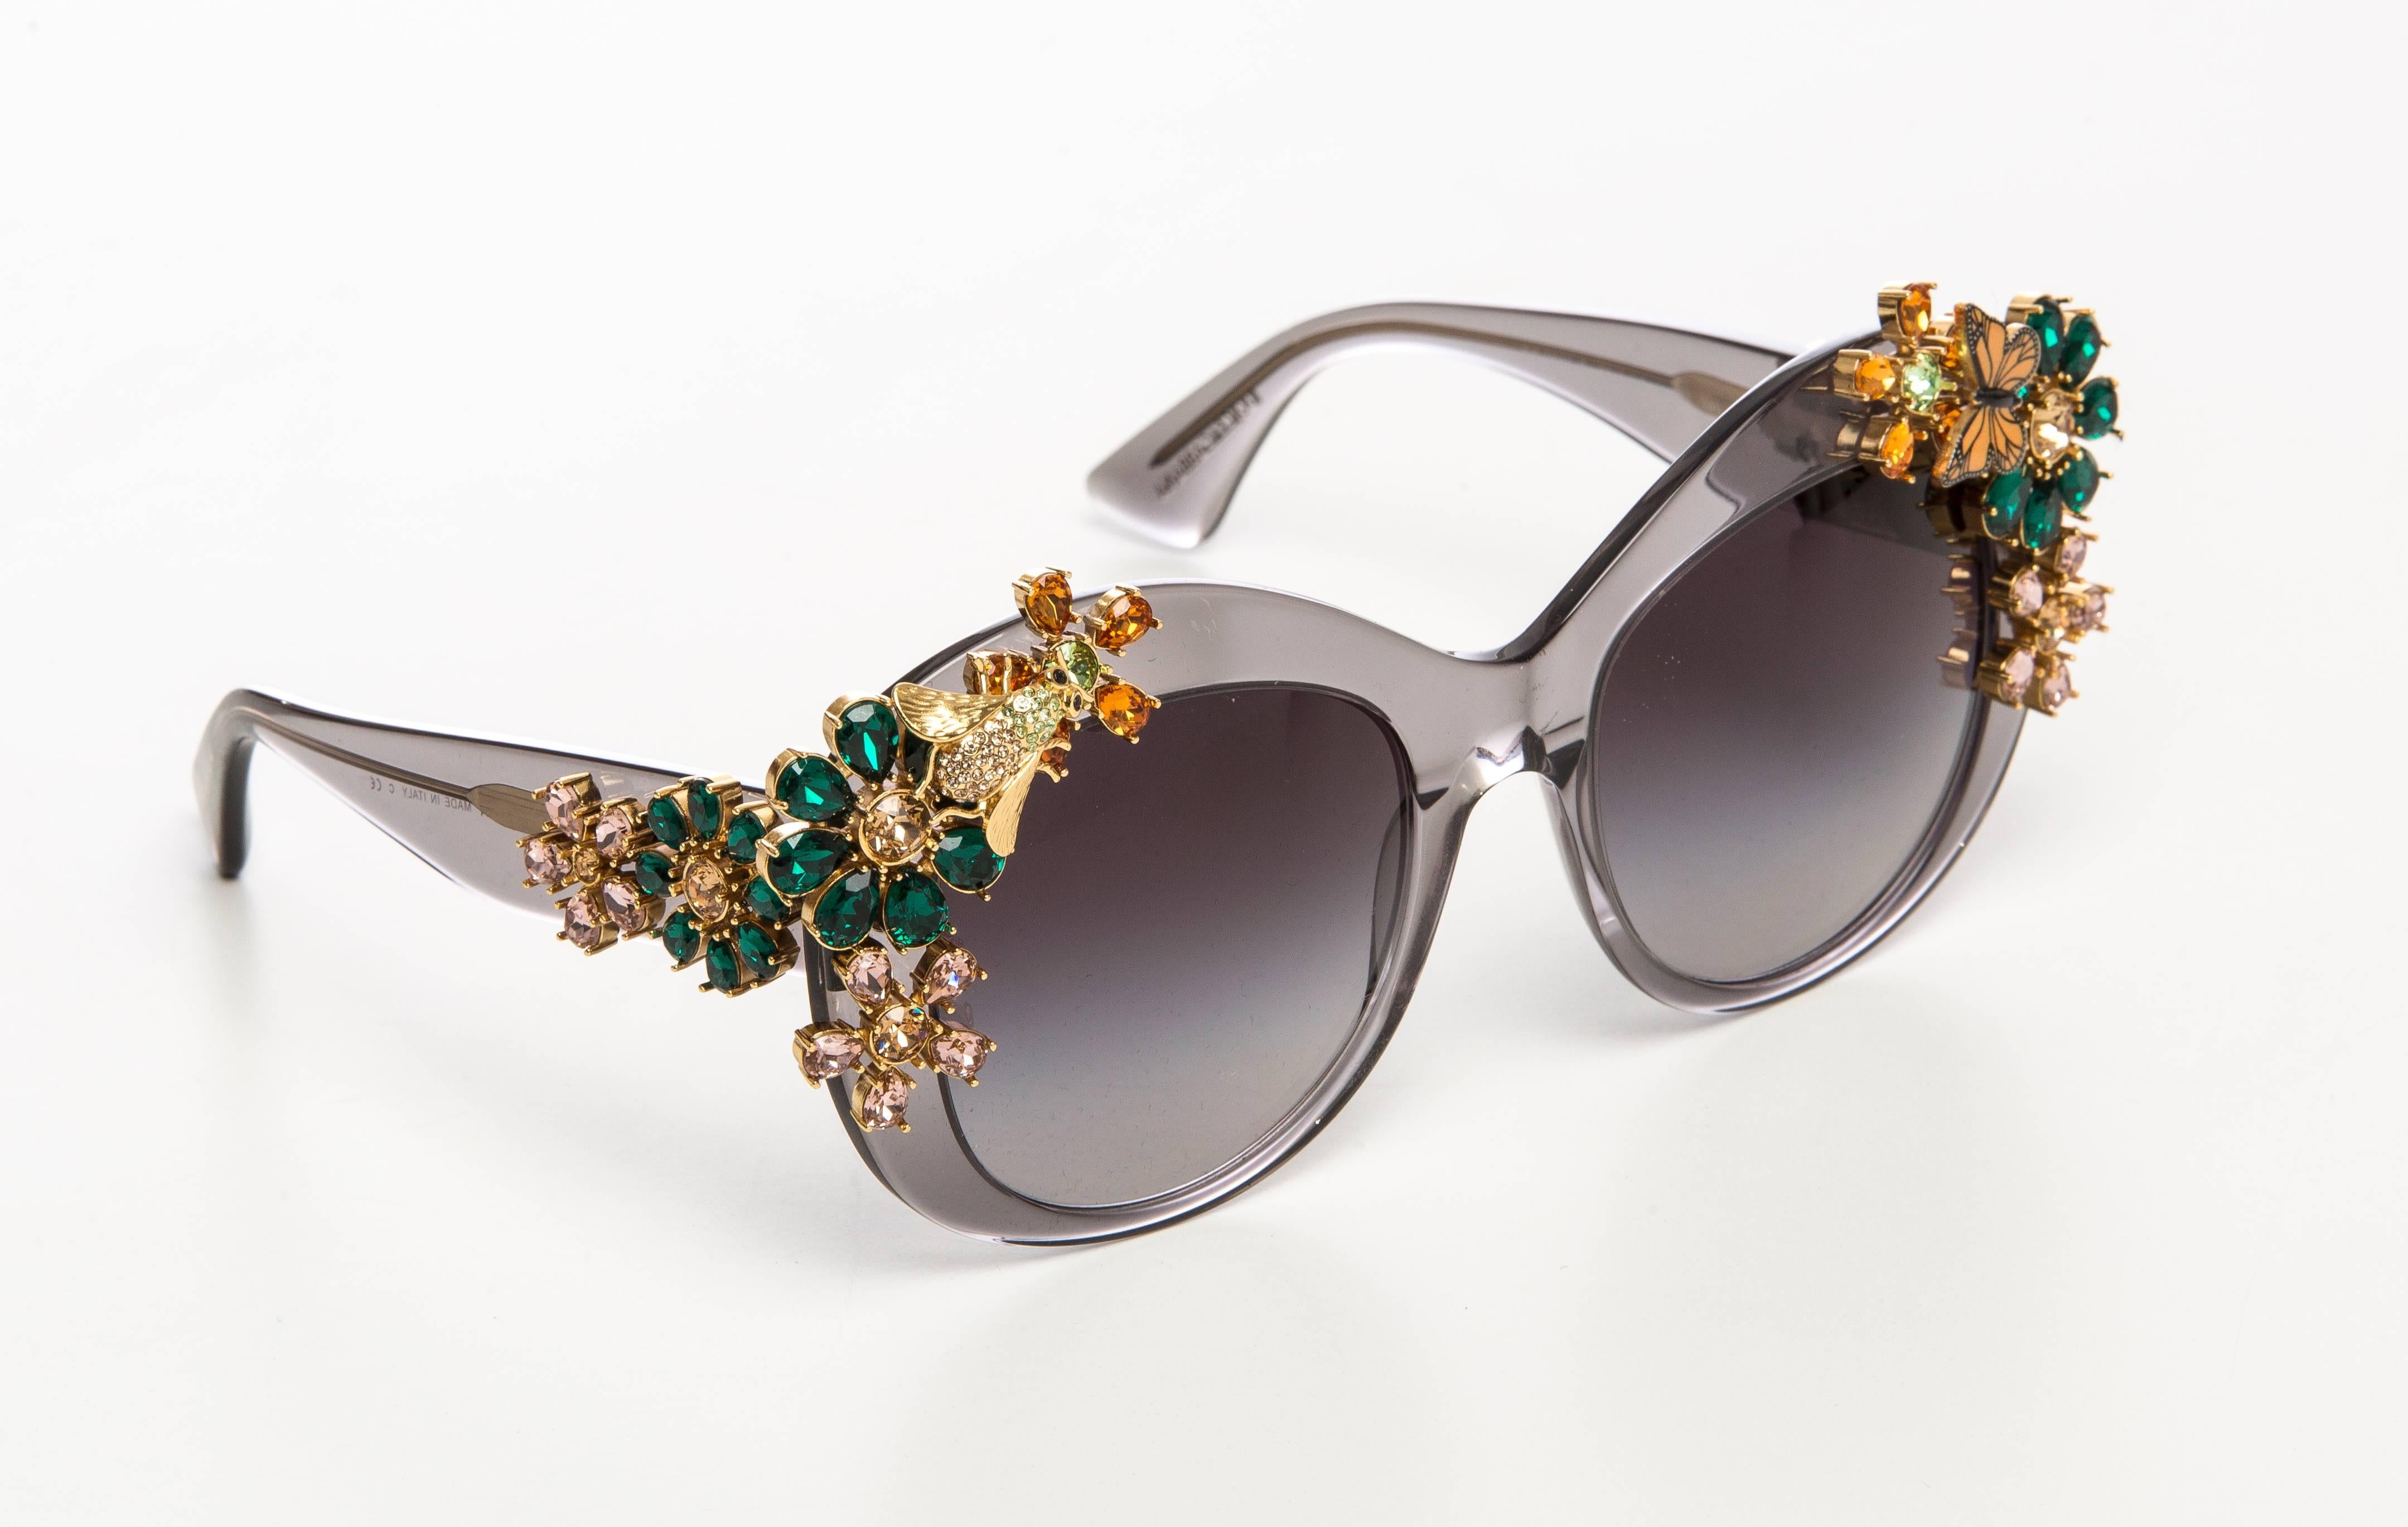  Dolce & Gabbana, Spring-Summer 2015 limited edition grey oversize handmade Enchanted Beauties collection sunglasses with gold-tone hardware, Swarovski crystal floral garden embellishments at frames, grey gradient lenses and logo at arms.